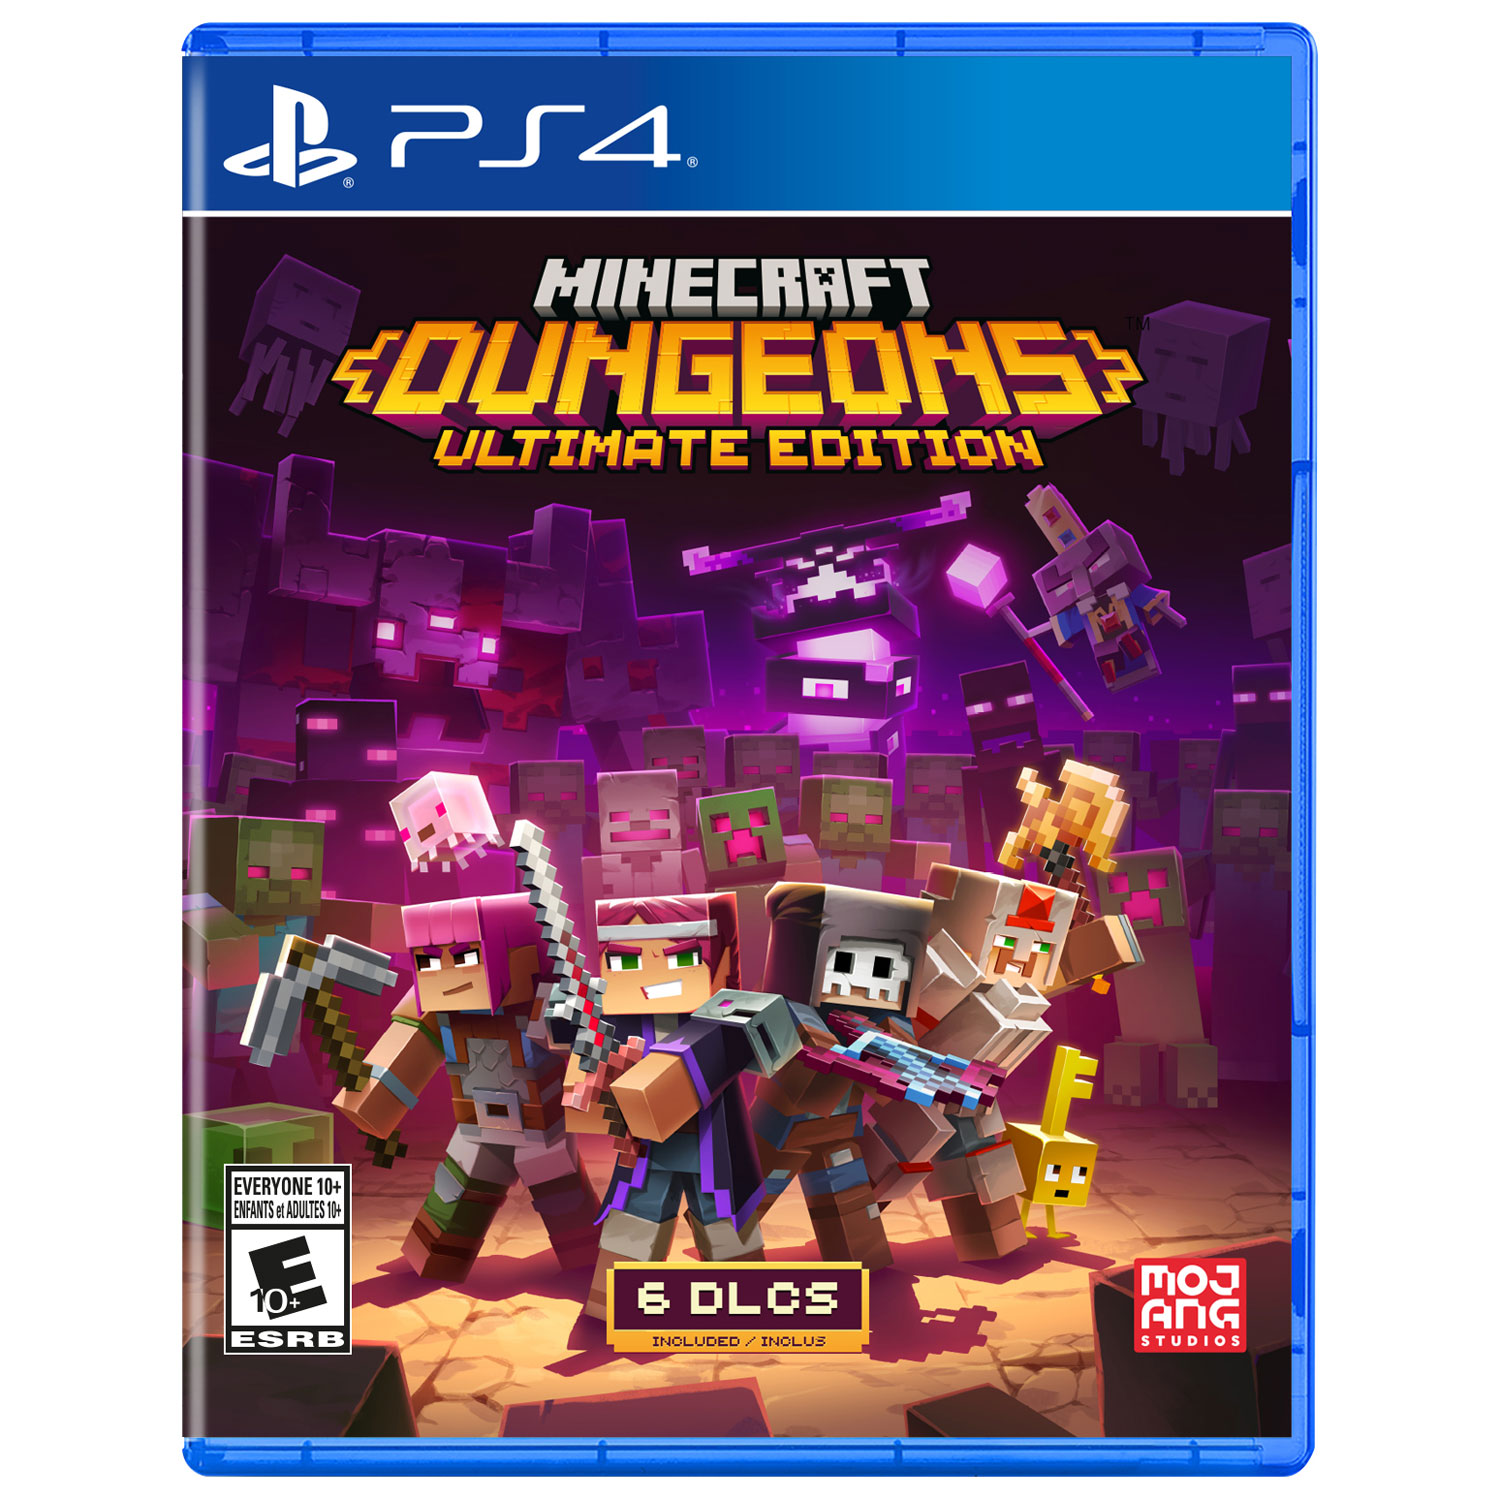 Minecraft Dungeons Ultimate Edition (PS4)